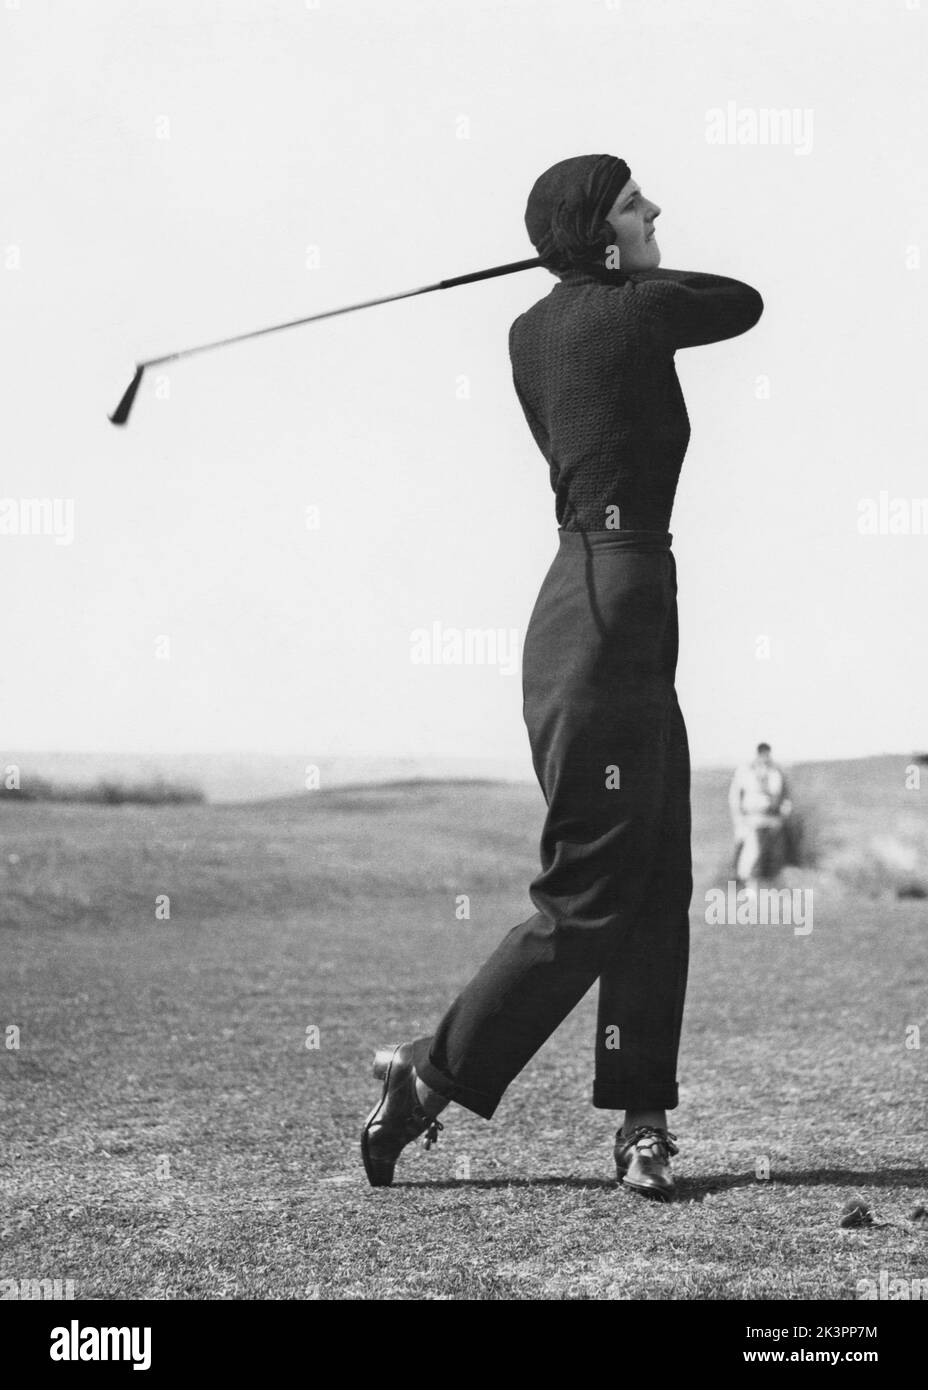 Golf in the 1930s. A young woman pictured in the moment after hitting the golf ball and is looking ahead to see if it's on the fairway or not. England 1930s Stock Photo